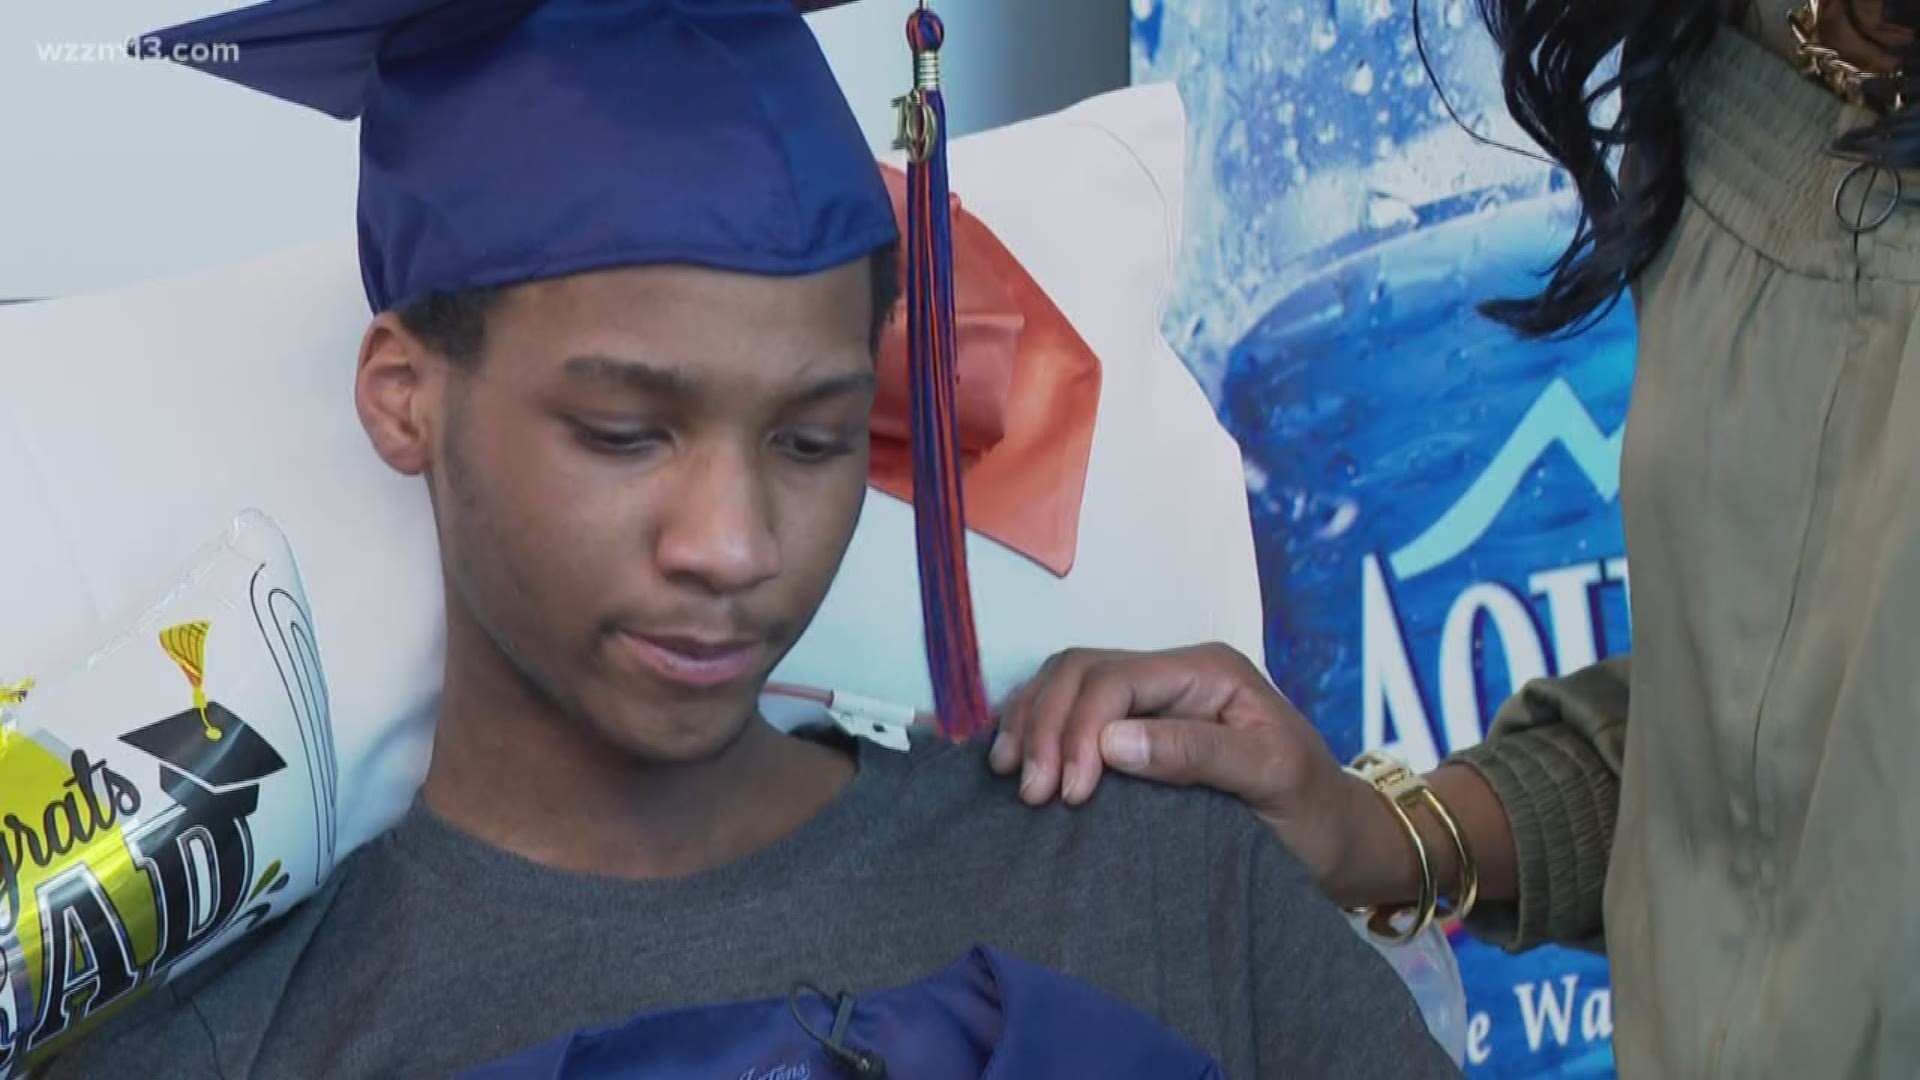 Graduation ceremony held at hospital for Grand Rapids student